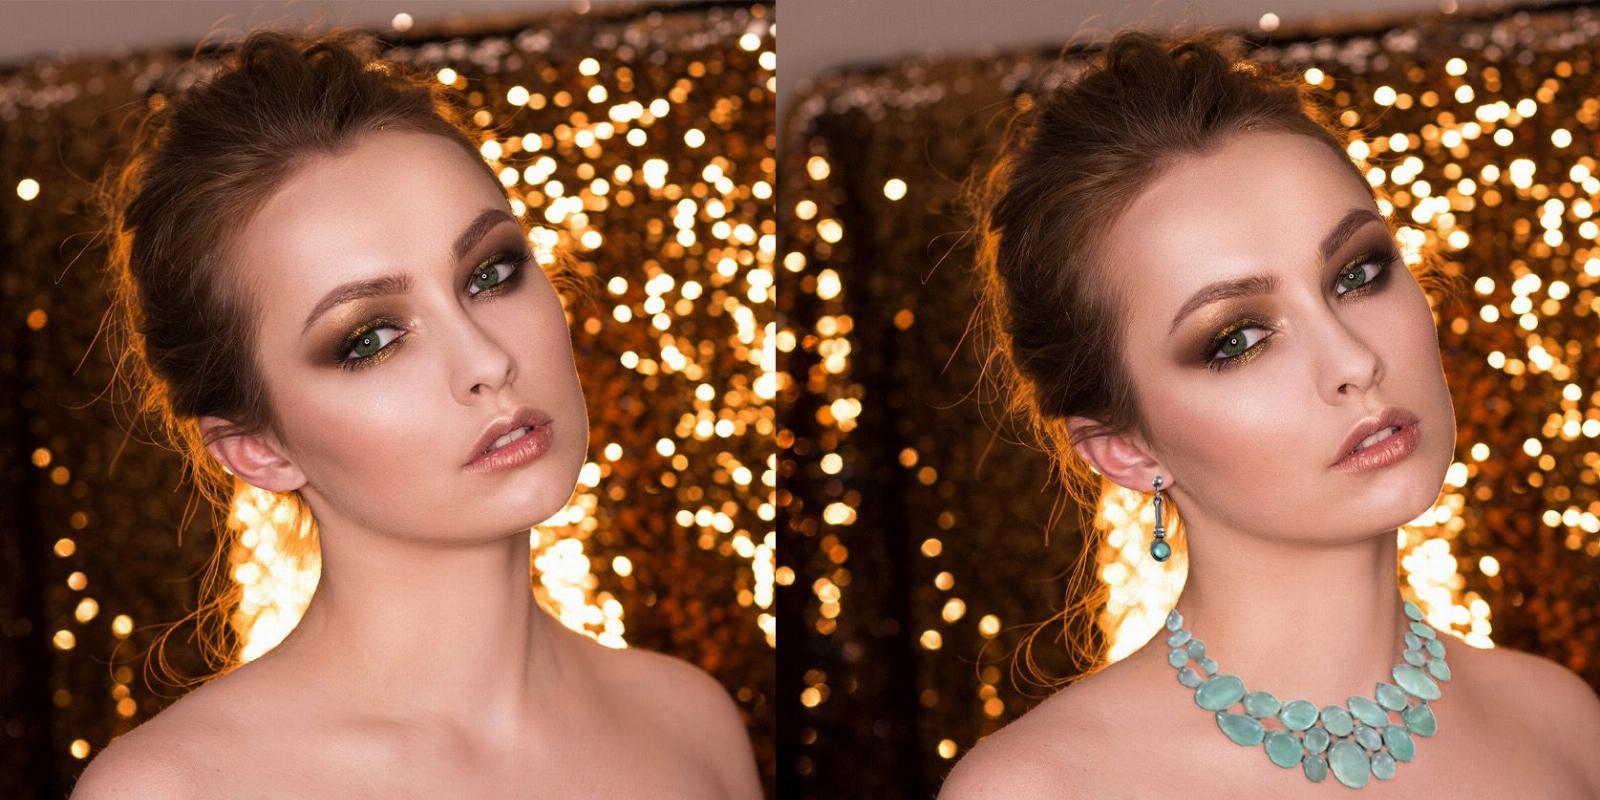 How to Add Jewelry to a Model in Photoshop